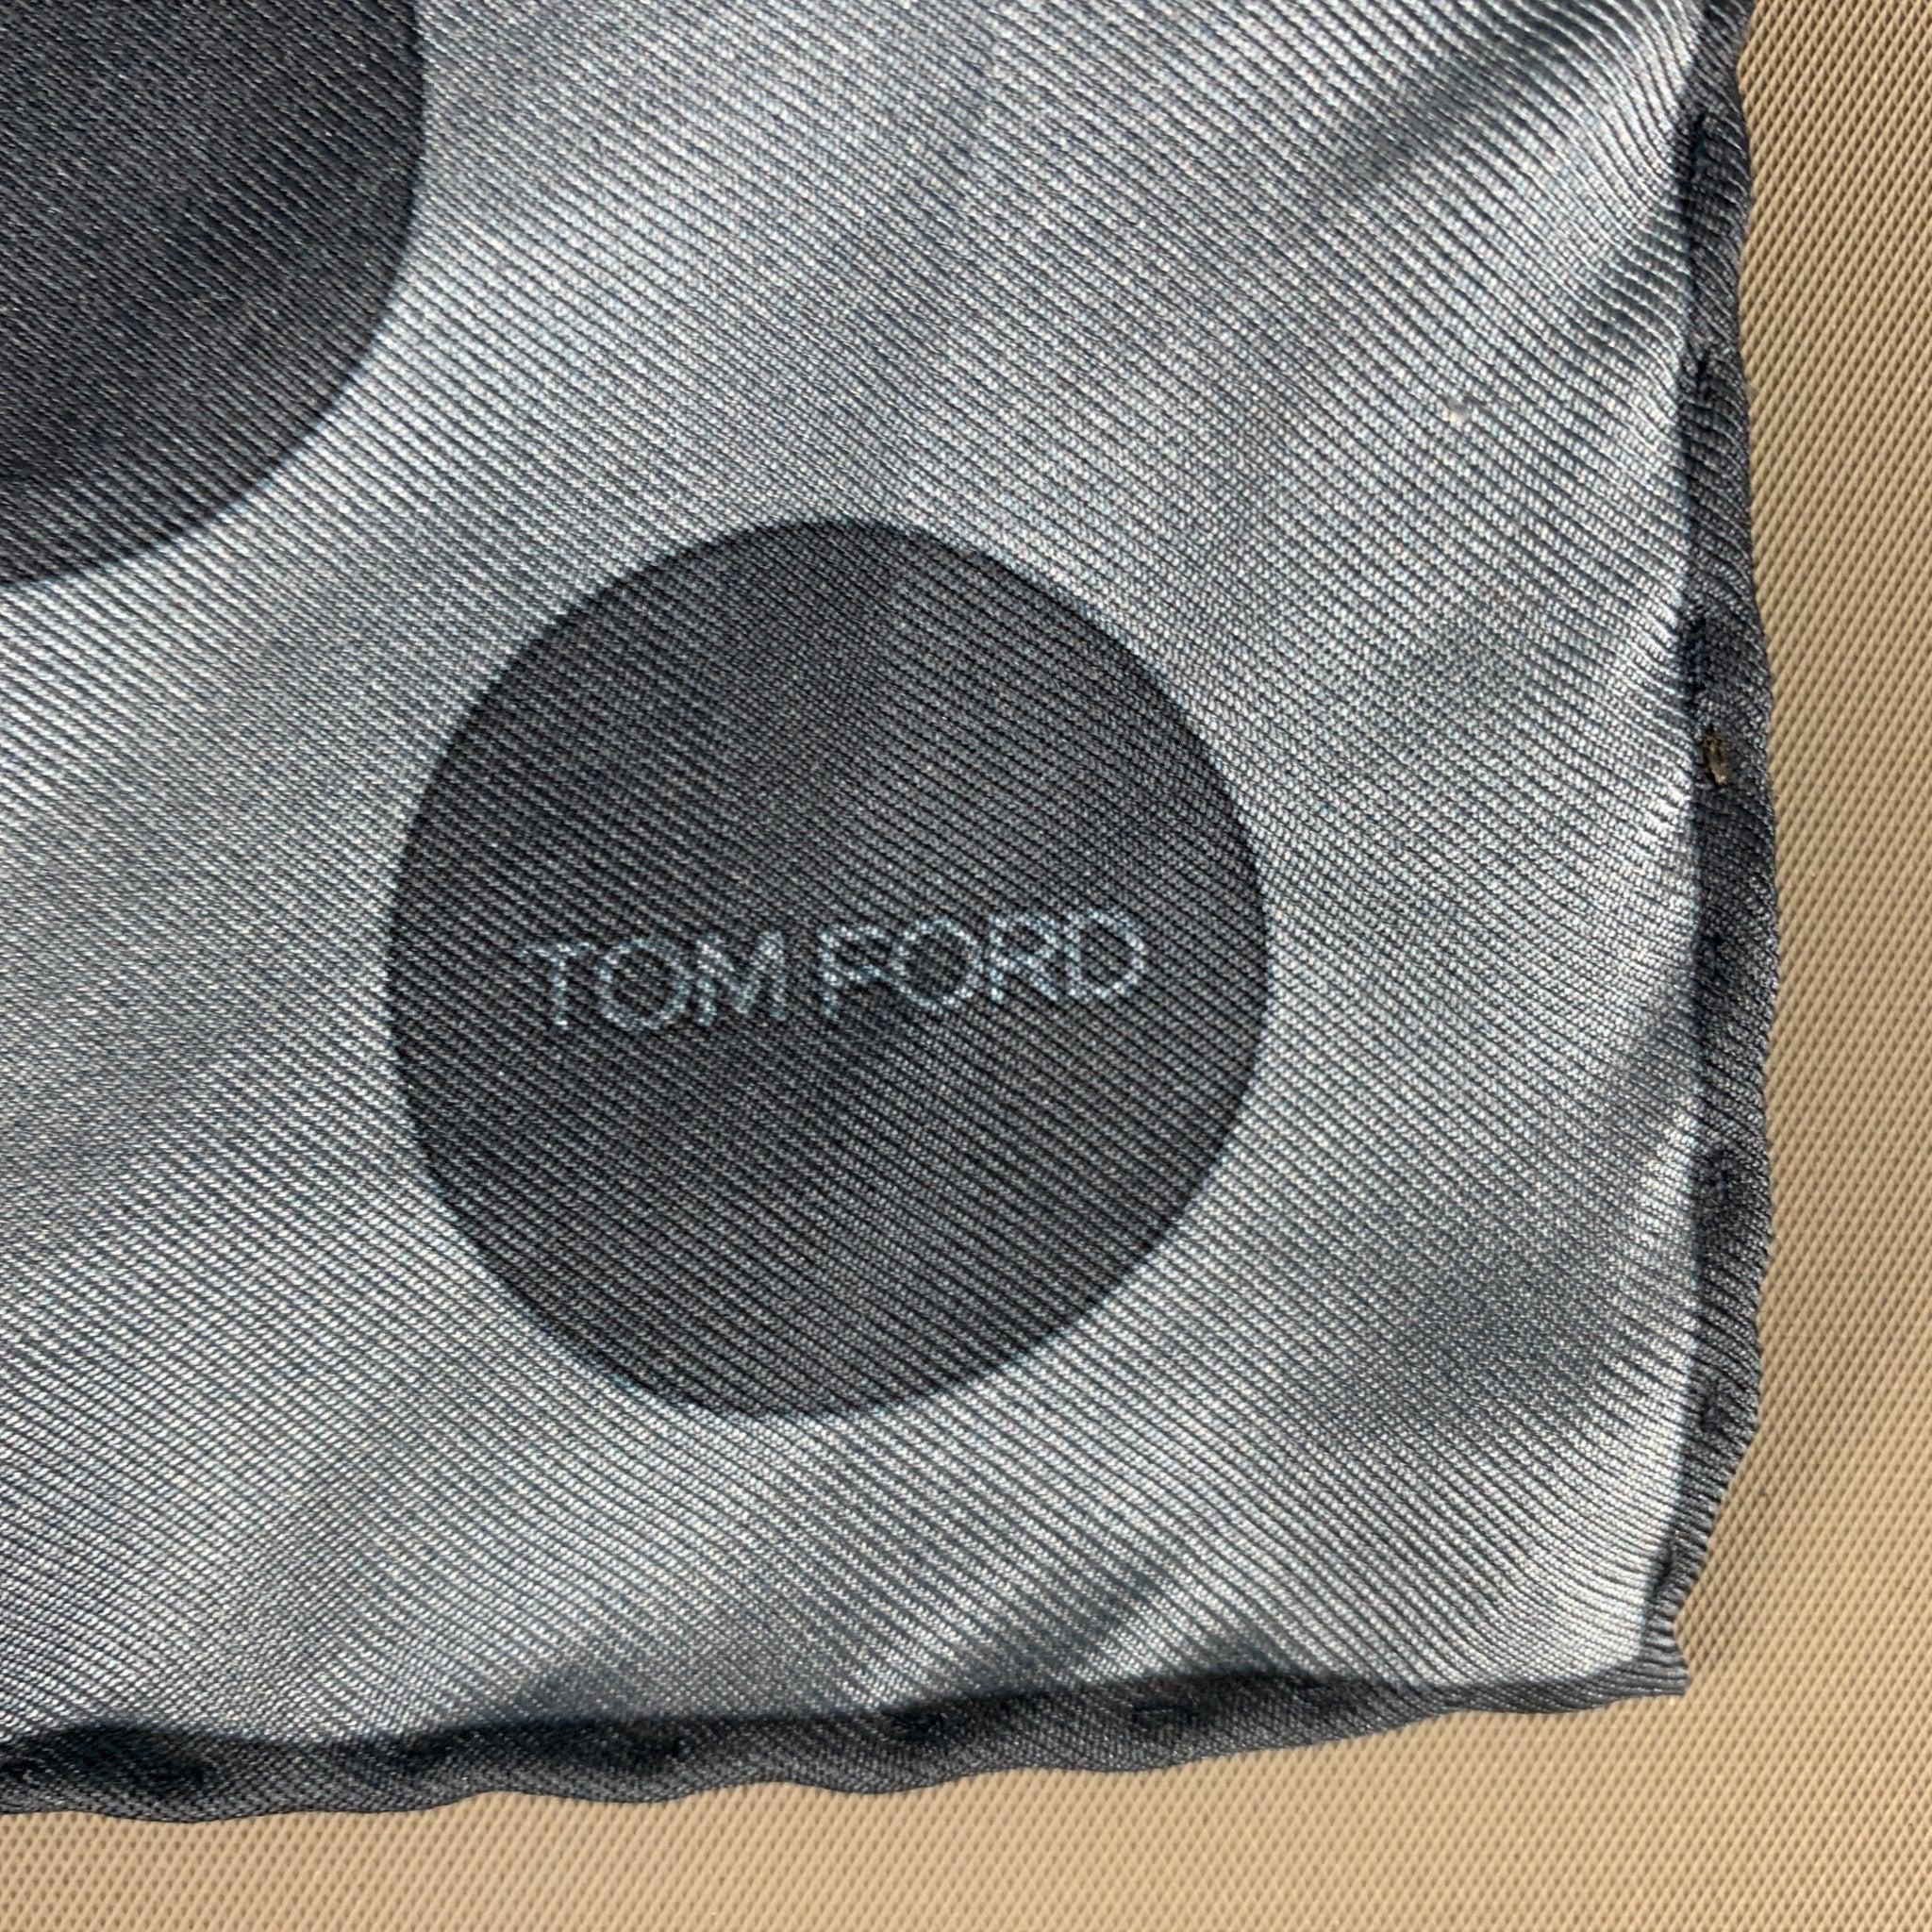 TOM FORD pocket square comes in tons of blue dotted silk pocket square.Excellent Pre-Owned Condition. 

Measurements: 
  15 inches  x 15 inches 
 
  
  
 
Reference: 127111
Category: Tie
More Details
    
Brand:  TOM FORD
Color:  Blue
Color 2: 